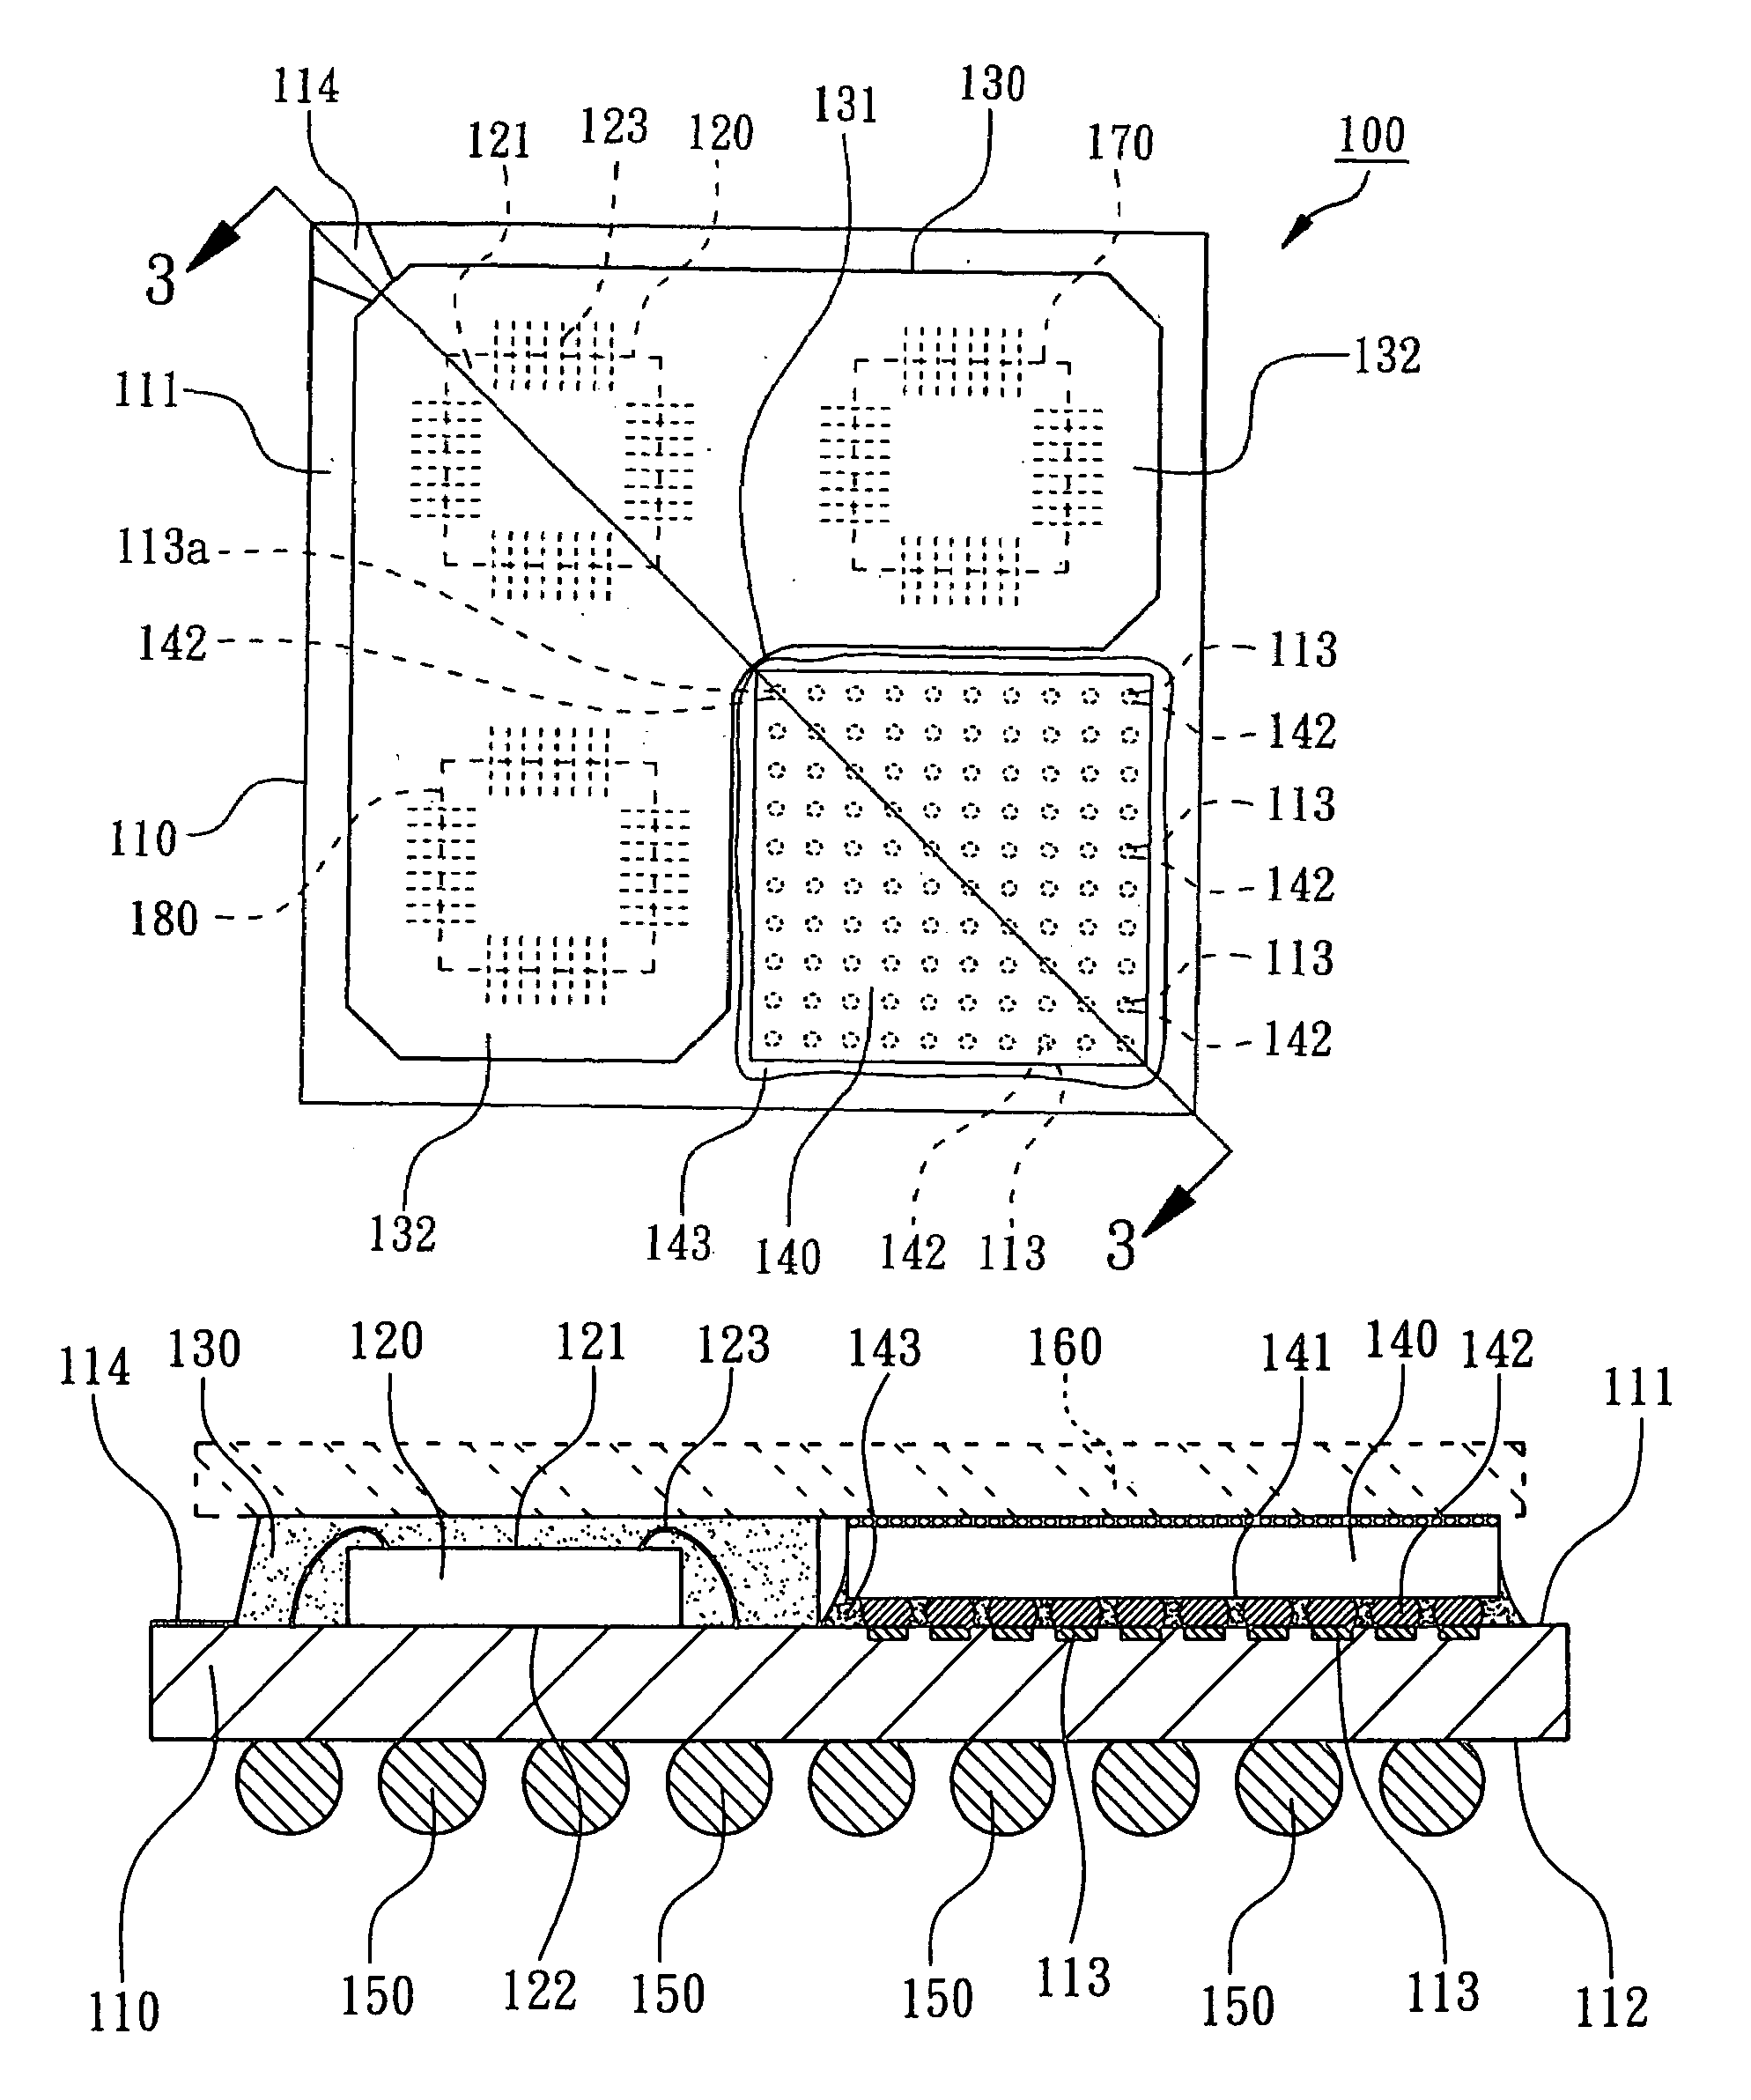 Multi-chip package combining wire-bonding and flip-chip configuration